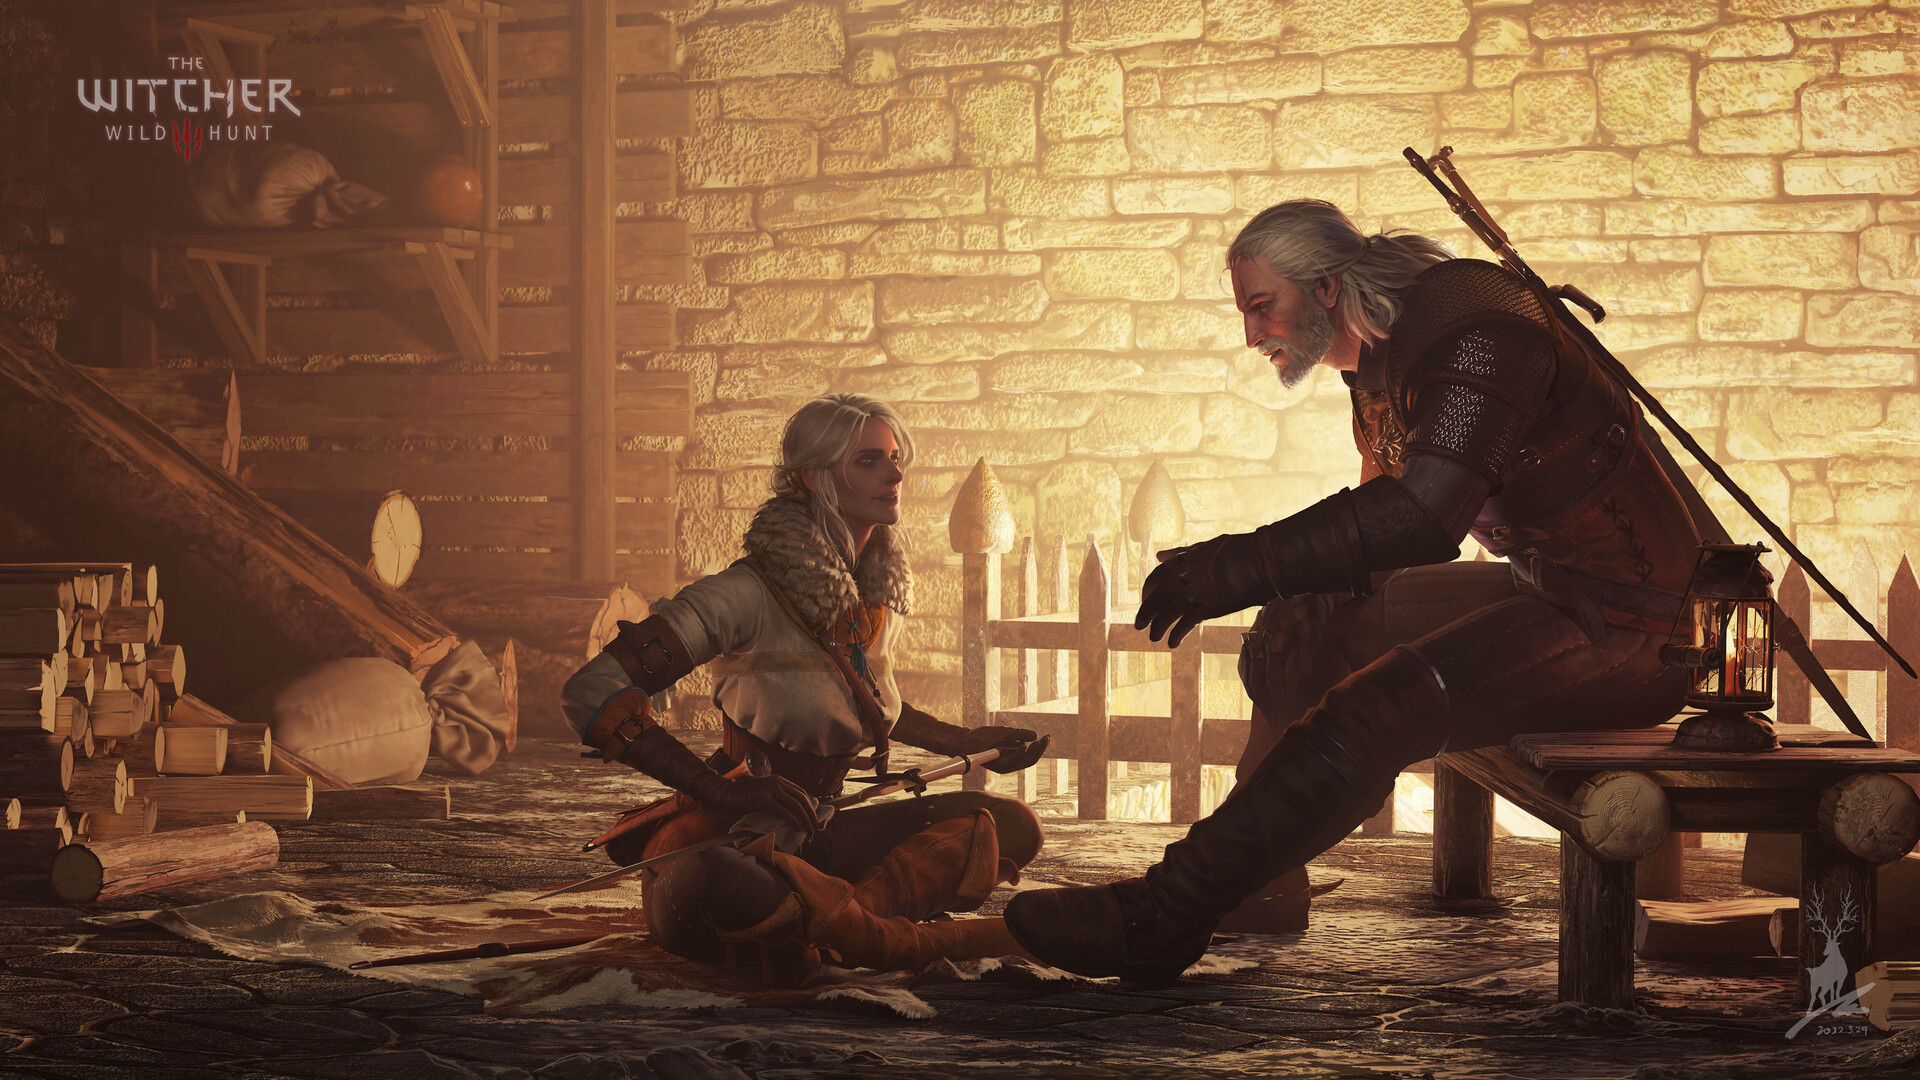 Log Video Game Characters Fan Art The Witcher Artwork The Witcher 3 The Witcher 3 Wild Hunt Sword Ge 1920x1080